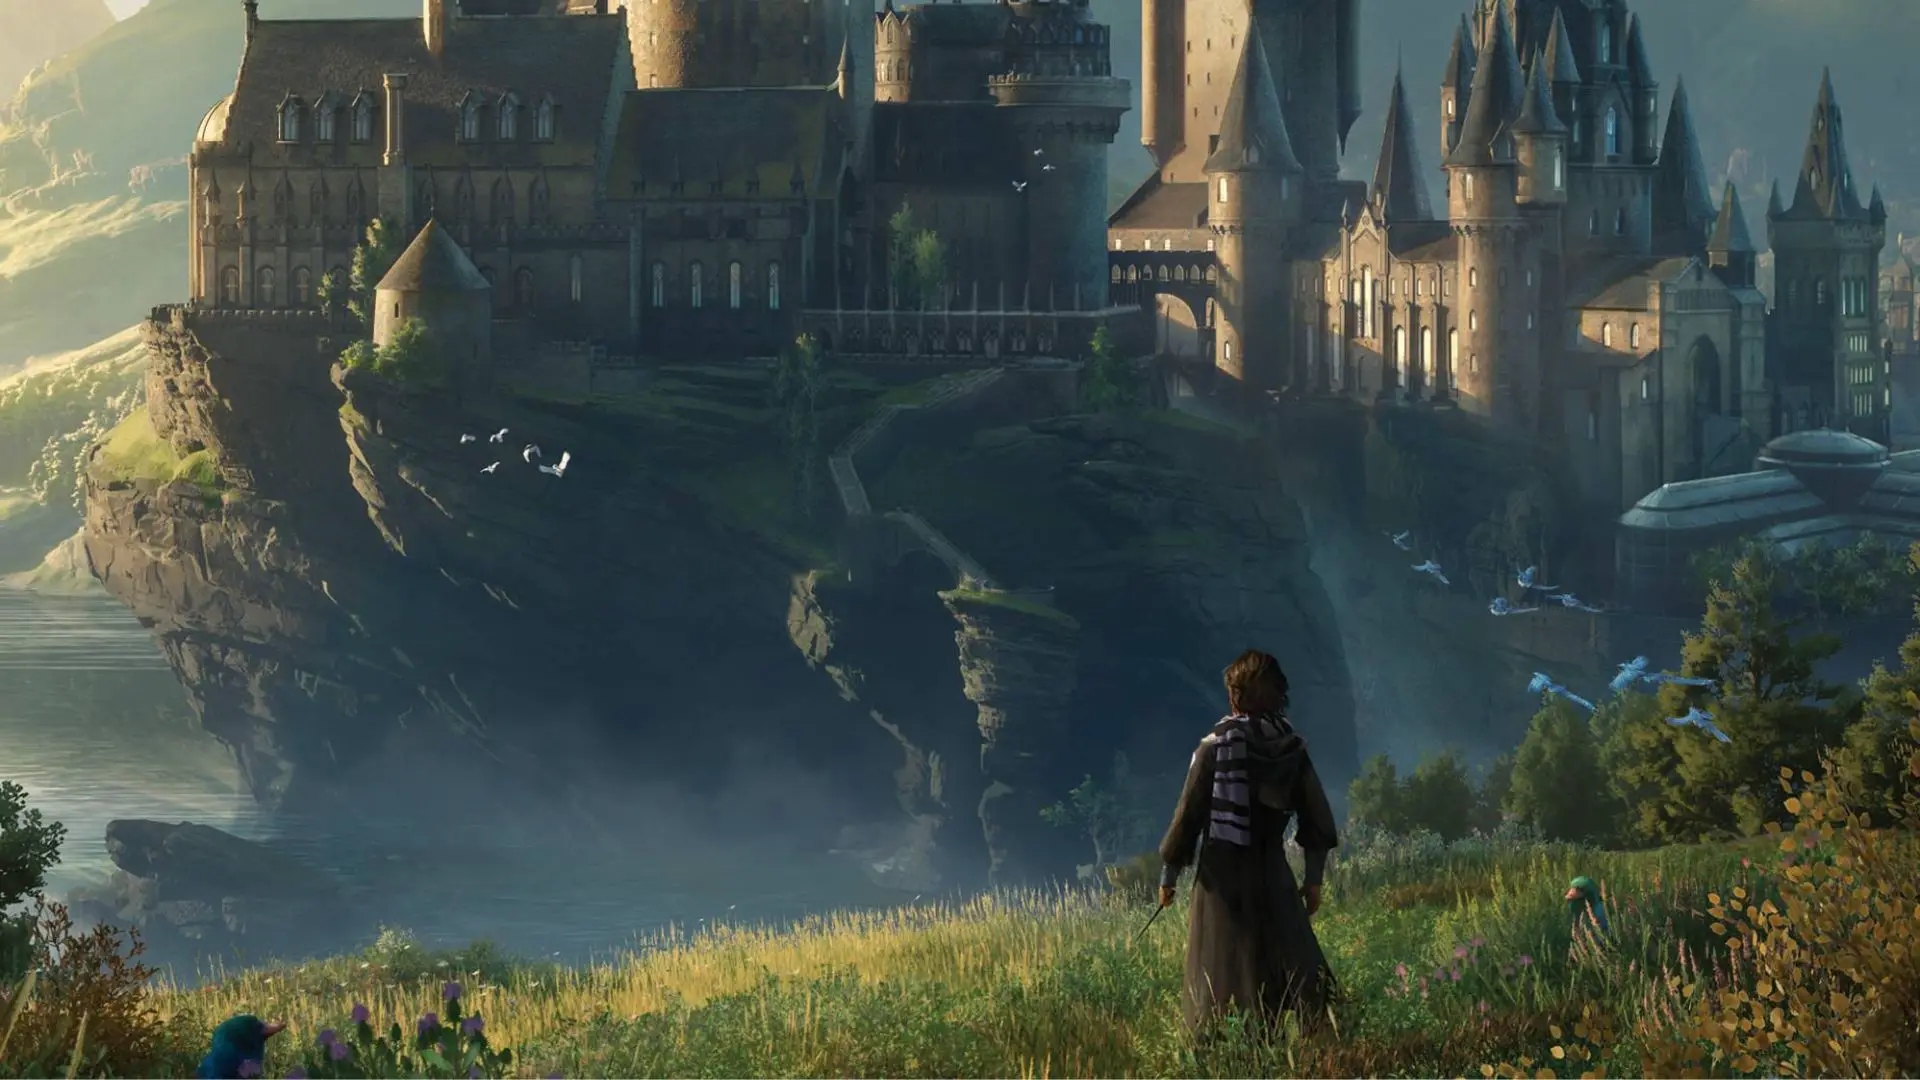 Get Lost in the Stunning World of Harry Potter with PS5 Graphics!